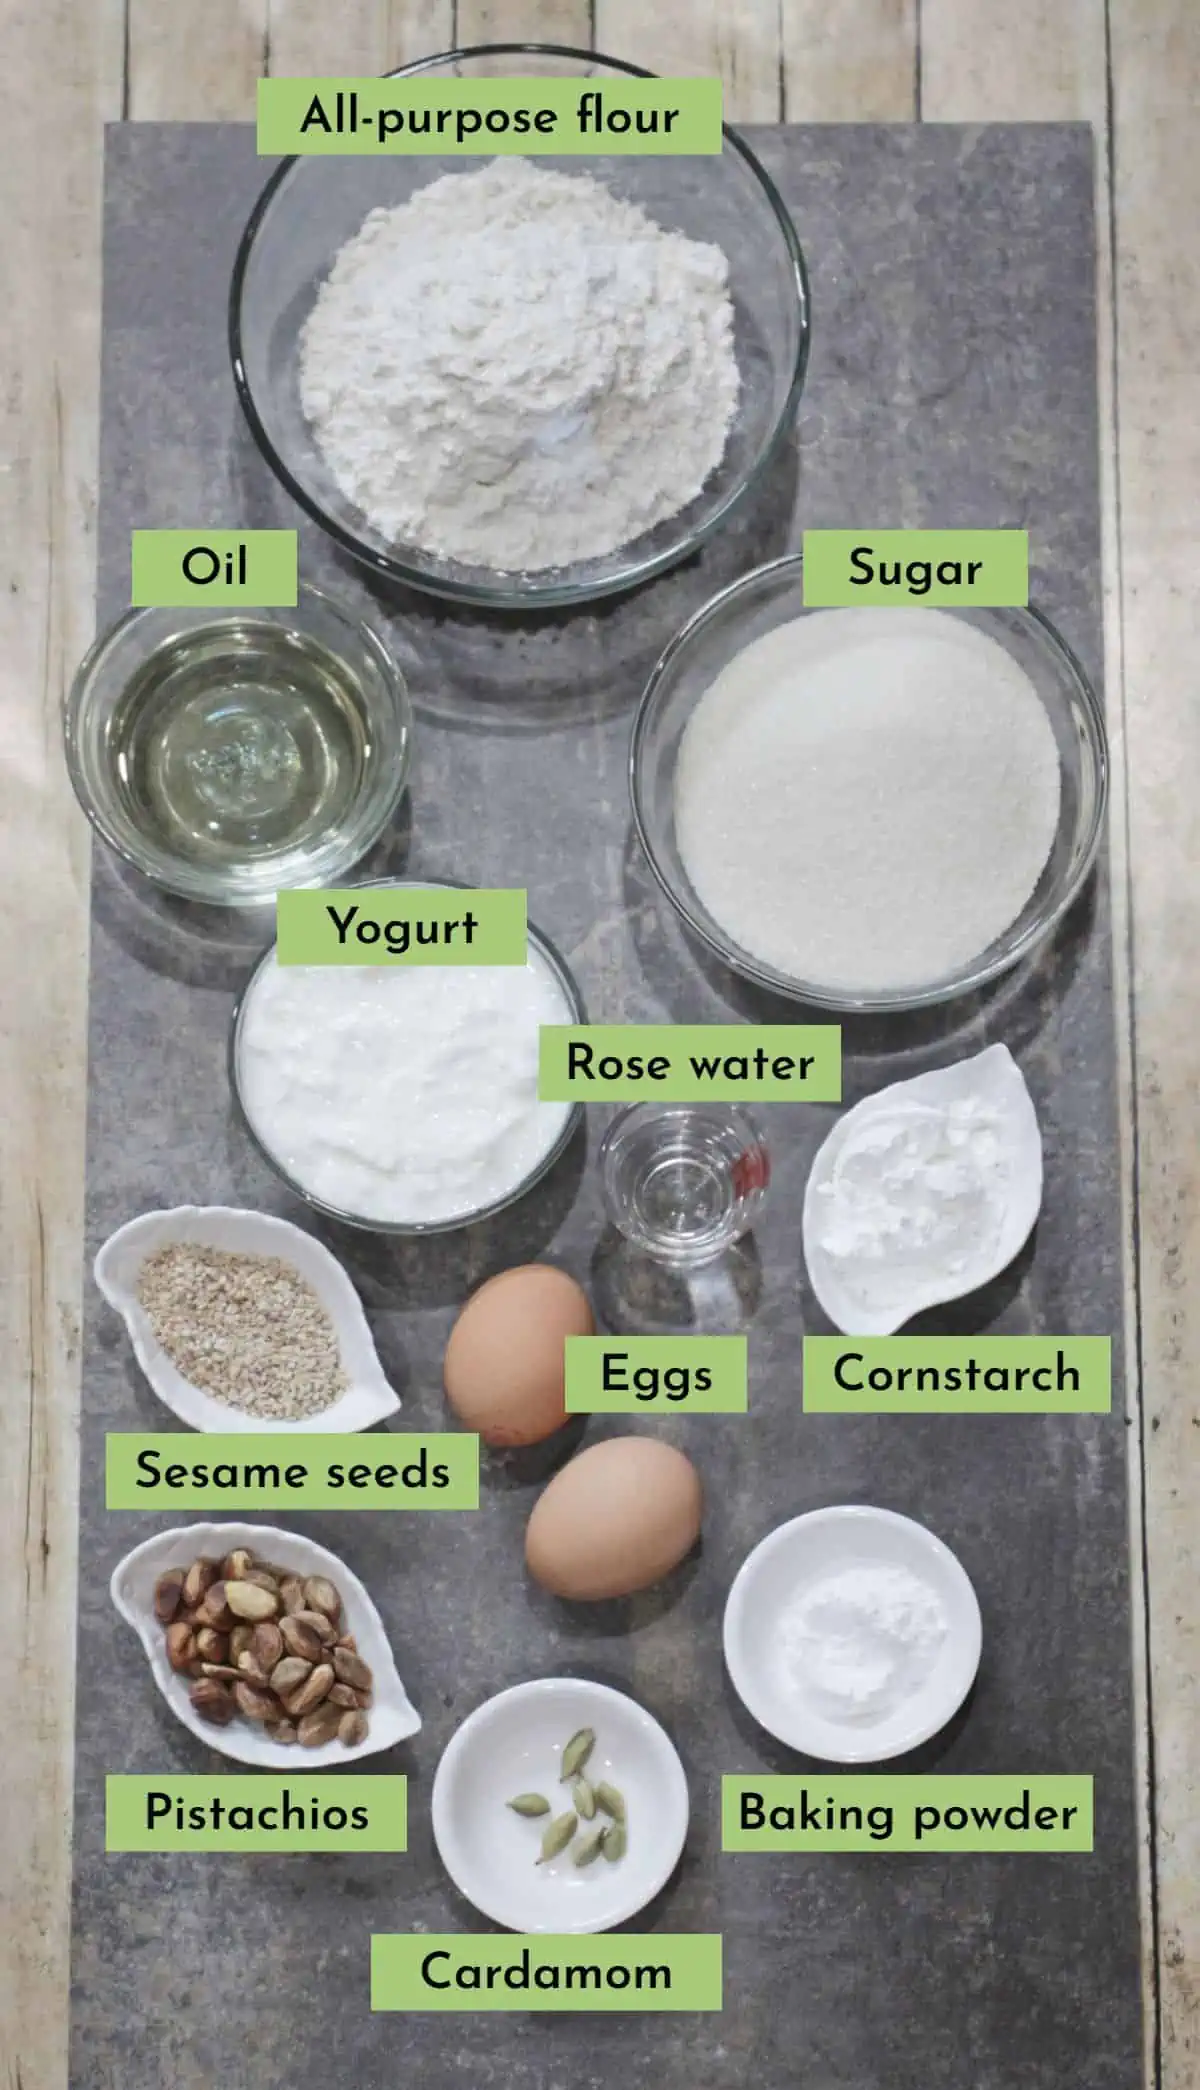 Ingredients needed to make Persian Cardamom and rose water muffins labelled.